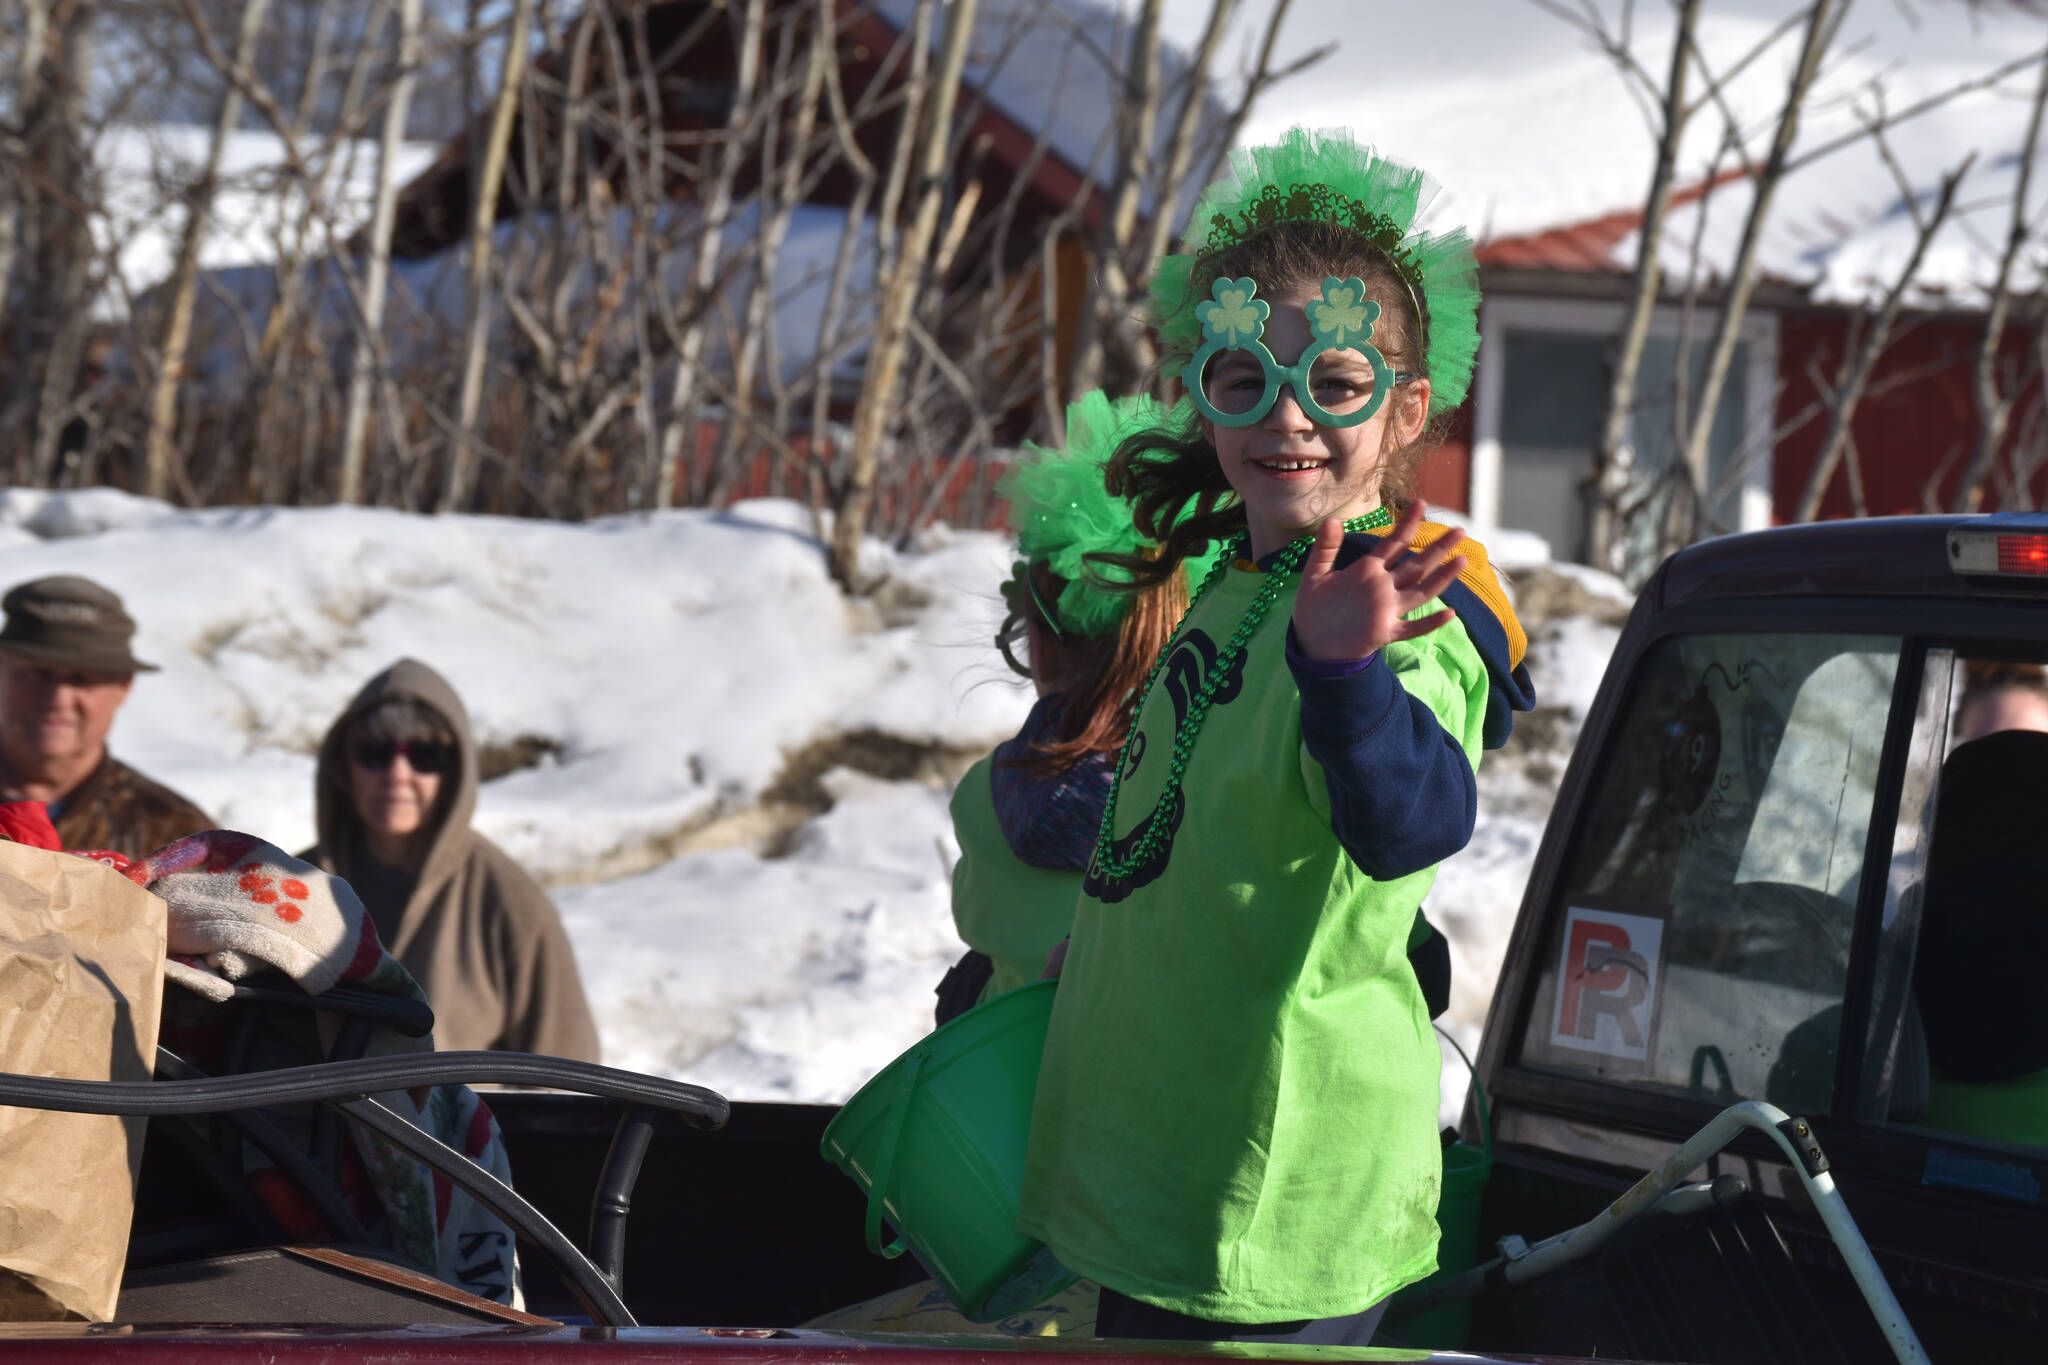 A child waves from the back of a truck as the 32nd annual Sweeney’s St. Patrick’s Day Parade proceeds down Fireweed Street in Soldotna, Alaska on Friday, March 17, 2023. (Jake Dye/Peninsula Clarion)